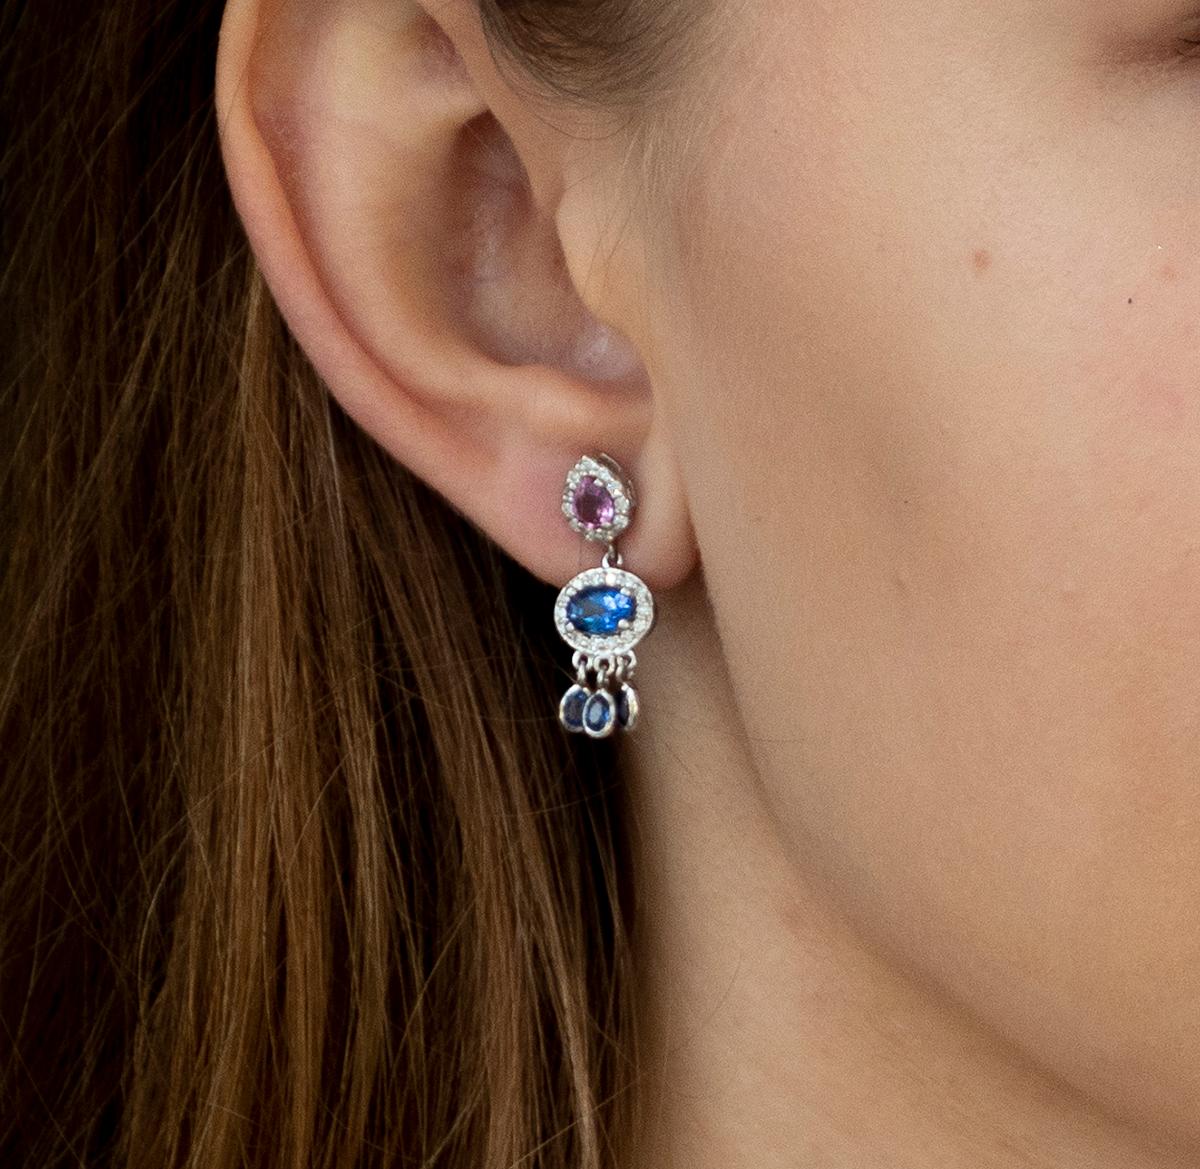 18k white halo diamond and sapphire gold drop earrings One Inch Length 
Pear shape pink sapphire alternating with oval shape blue sapphire in diamond with six Dangle oval sapphires 
Total carat weight of Sapphires 2.85 carats
Diamond weight 0.85